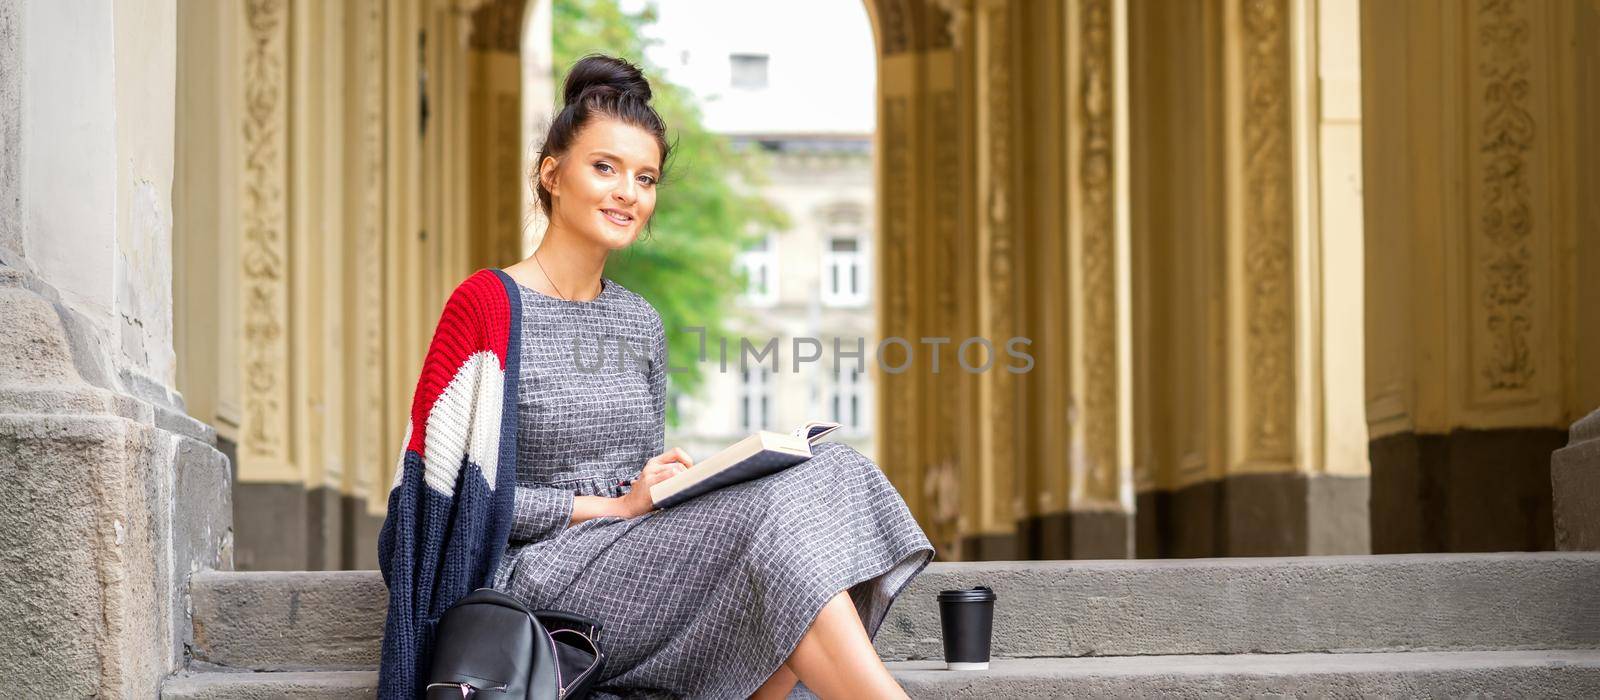 Portrait of a young female student with a book sitting on the stairs of building outdoors